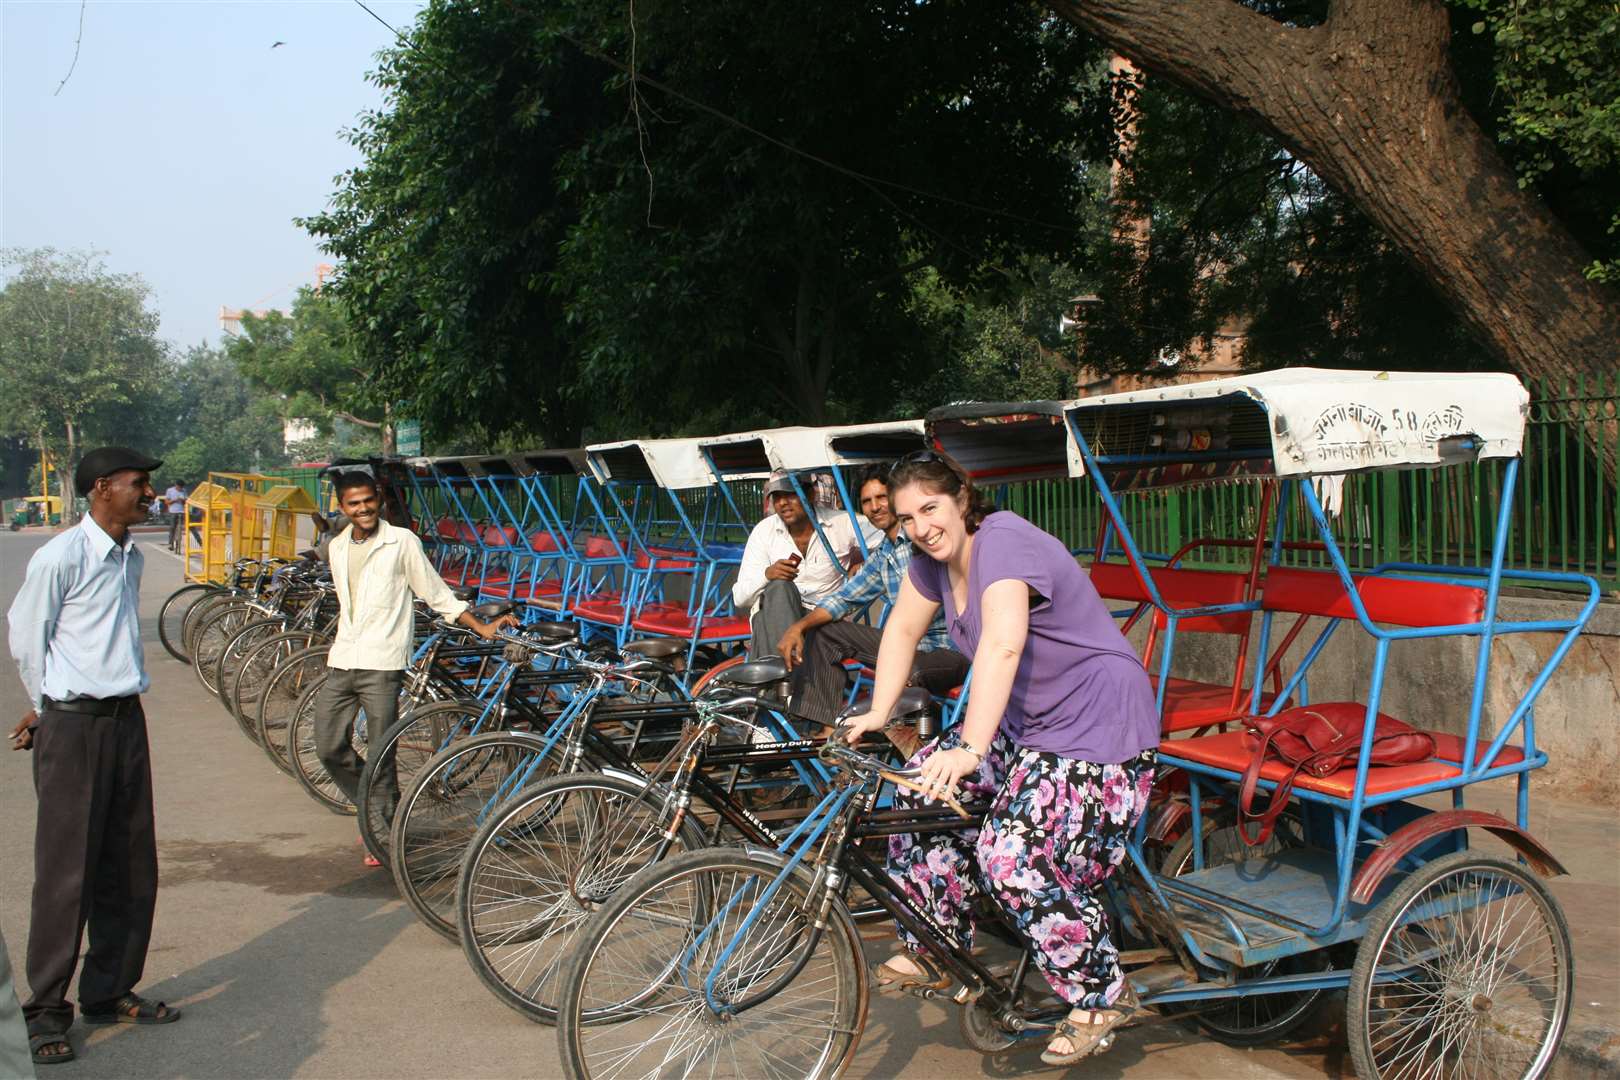 Claire Boxall in India on the Voluntary Service Overseas programme